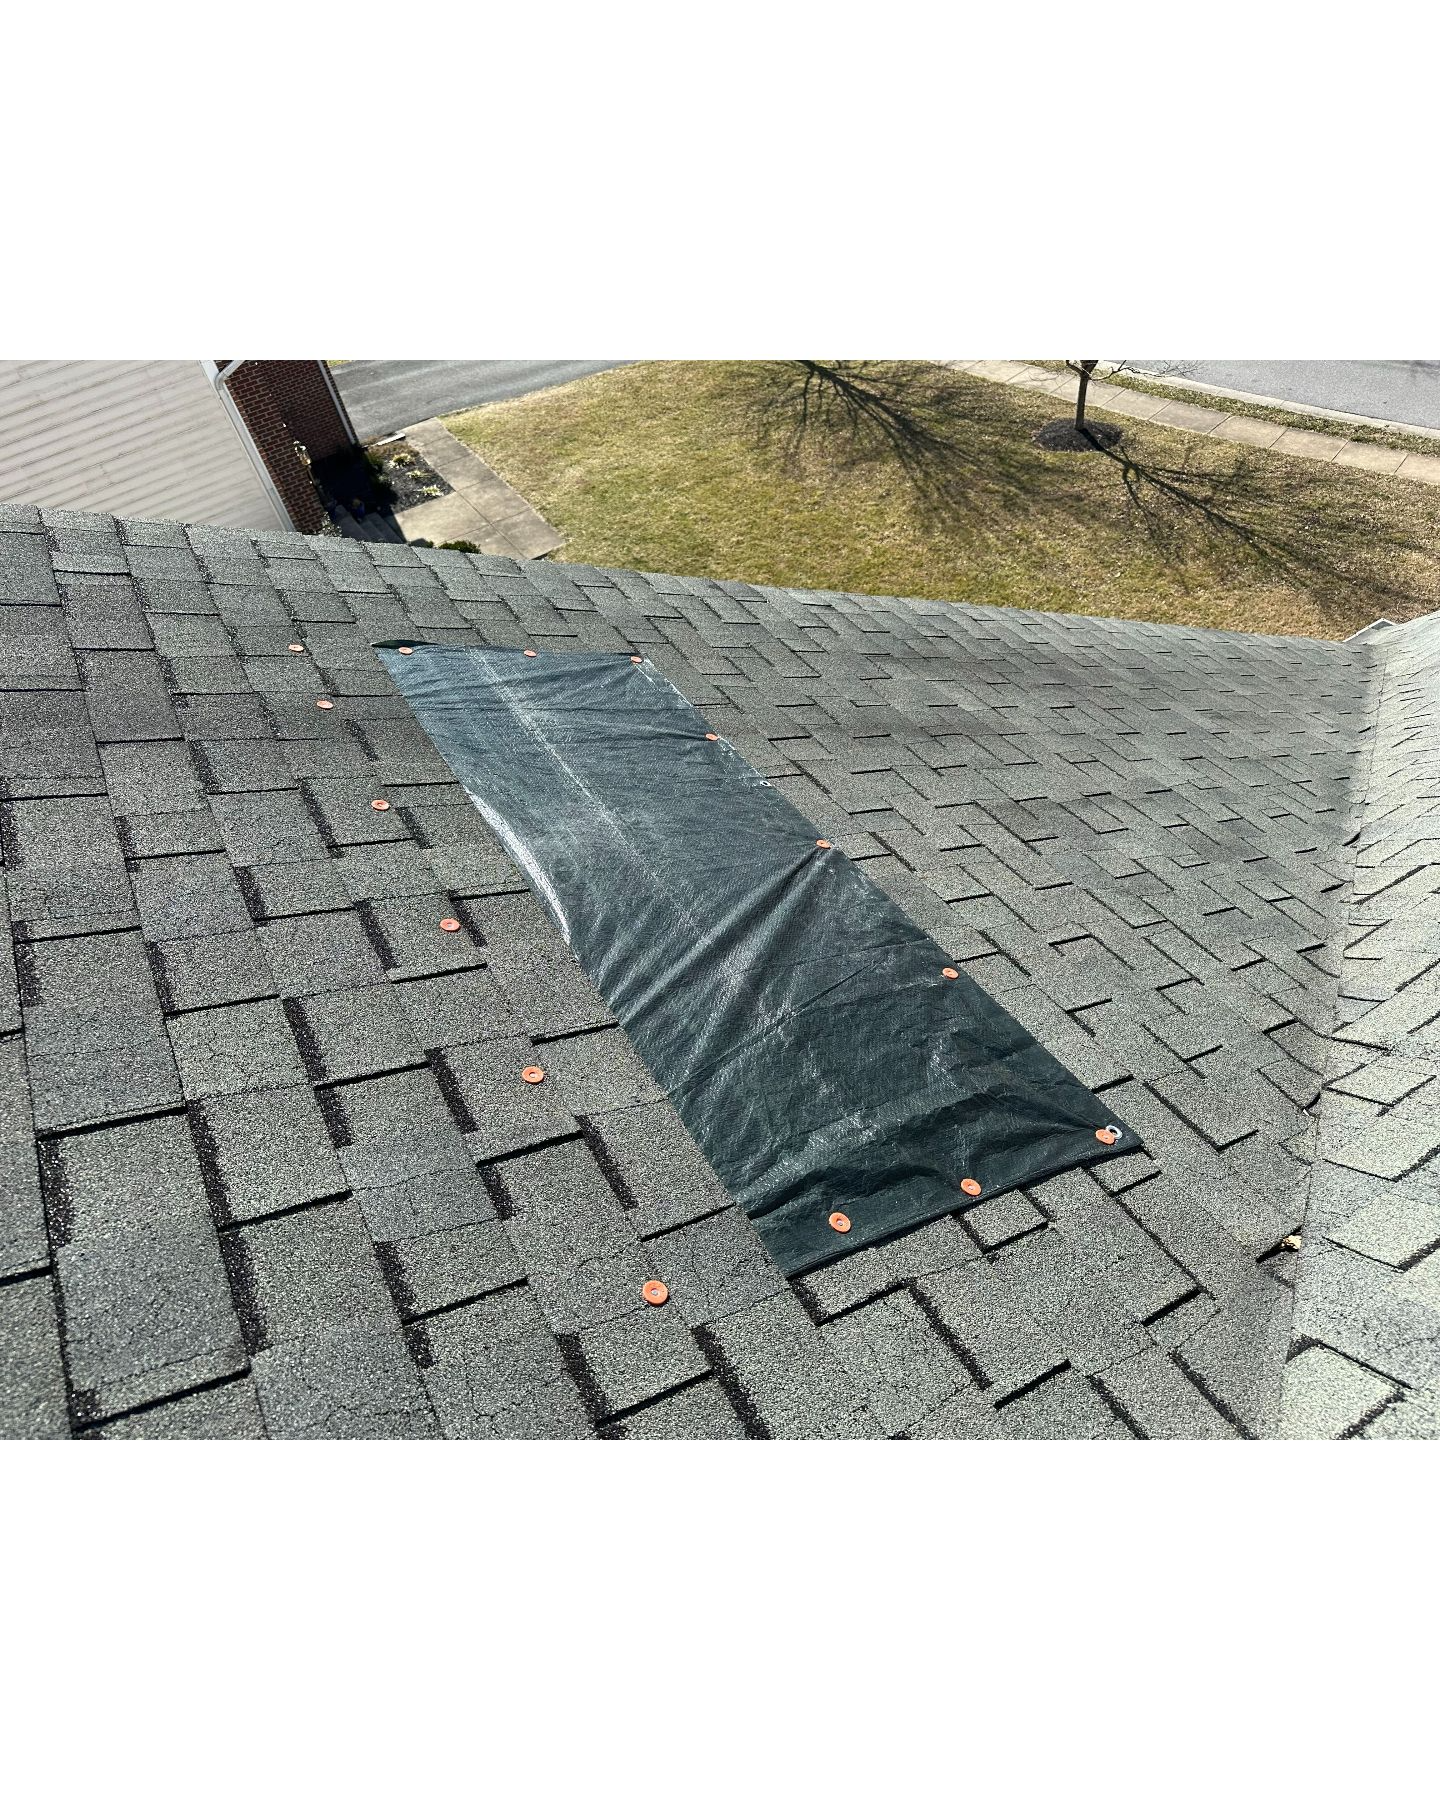 Tarp installed to stop water from getting under the shingles and into the house